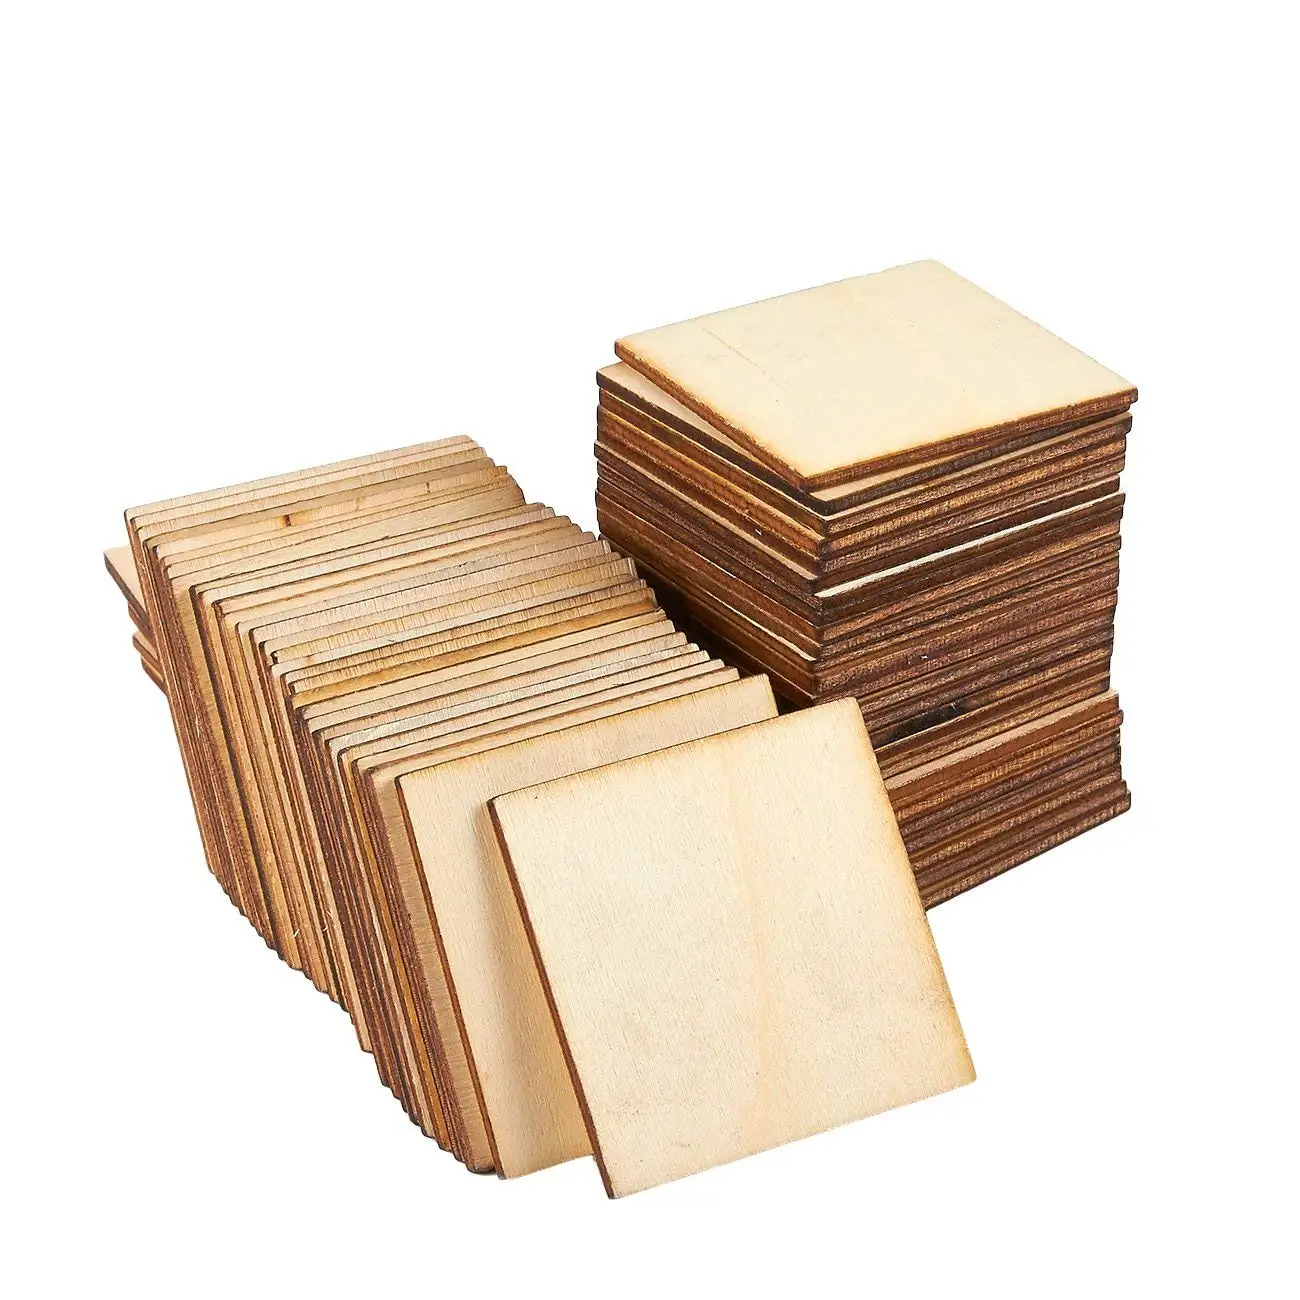 small wood pieces for crafts